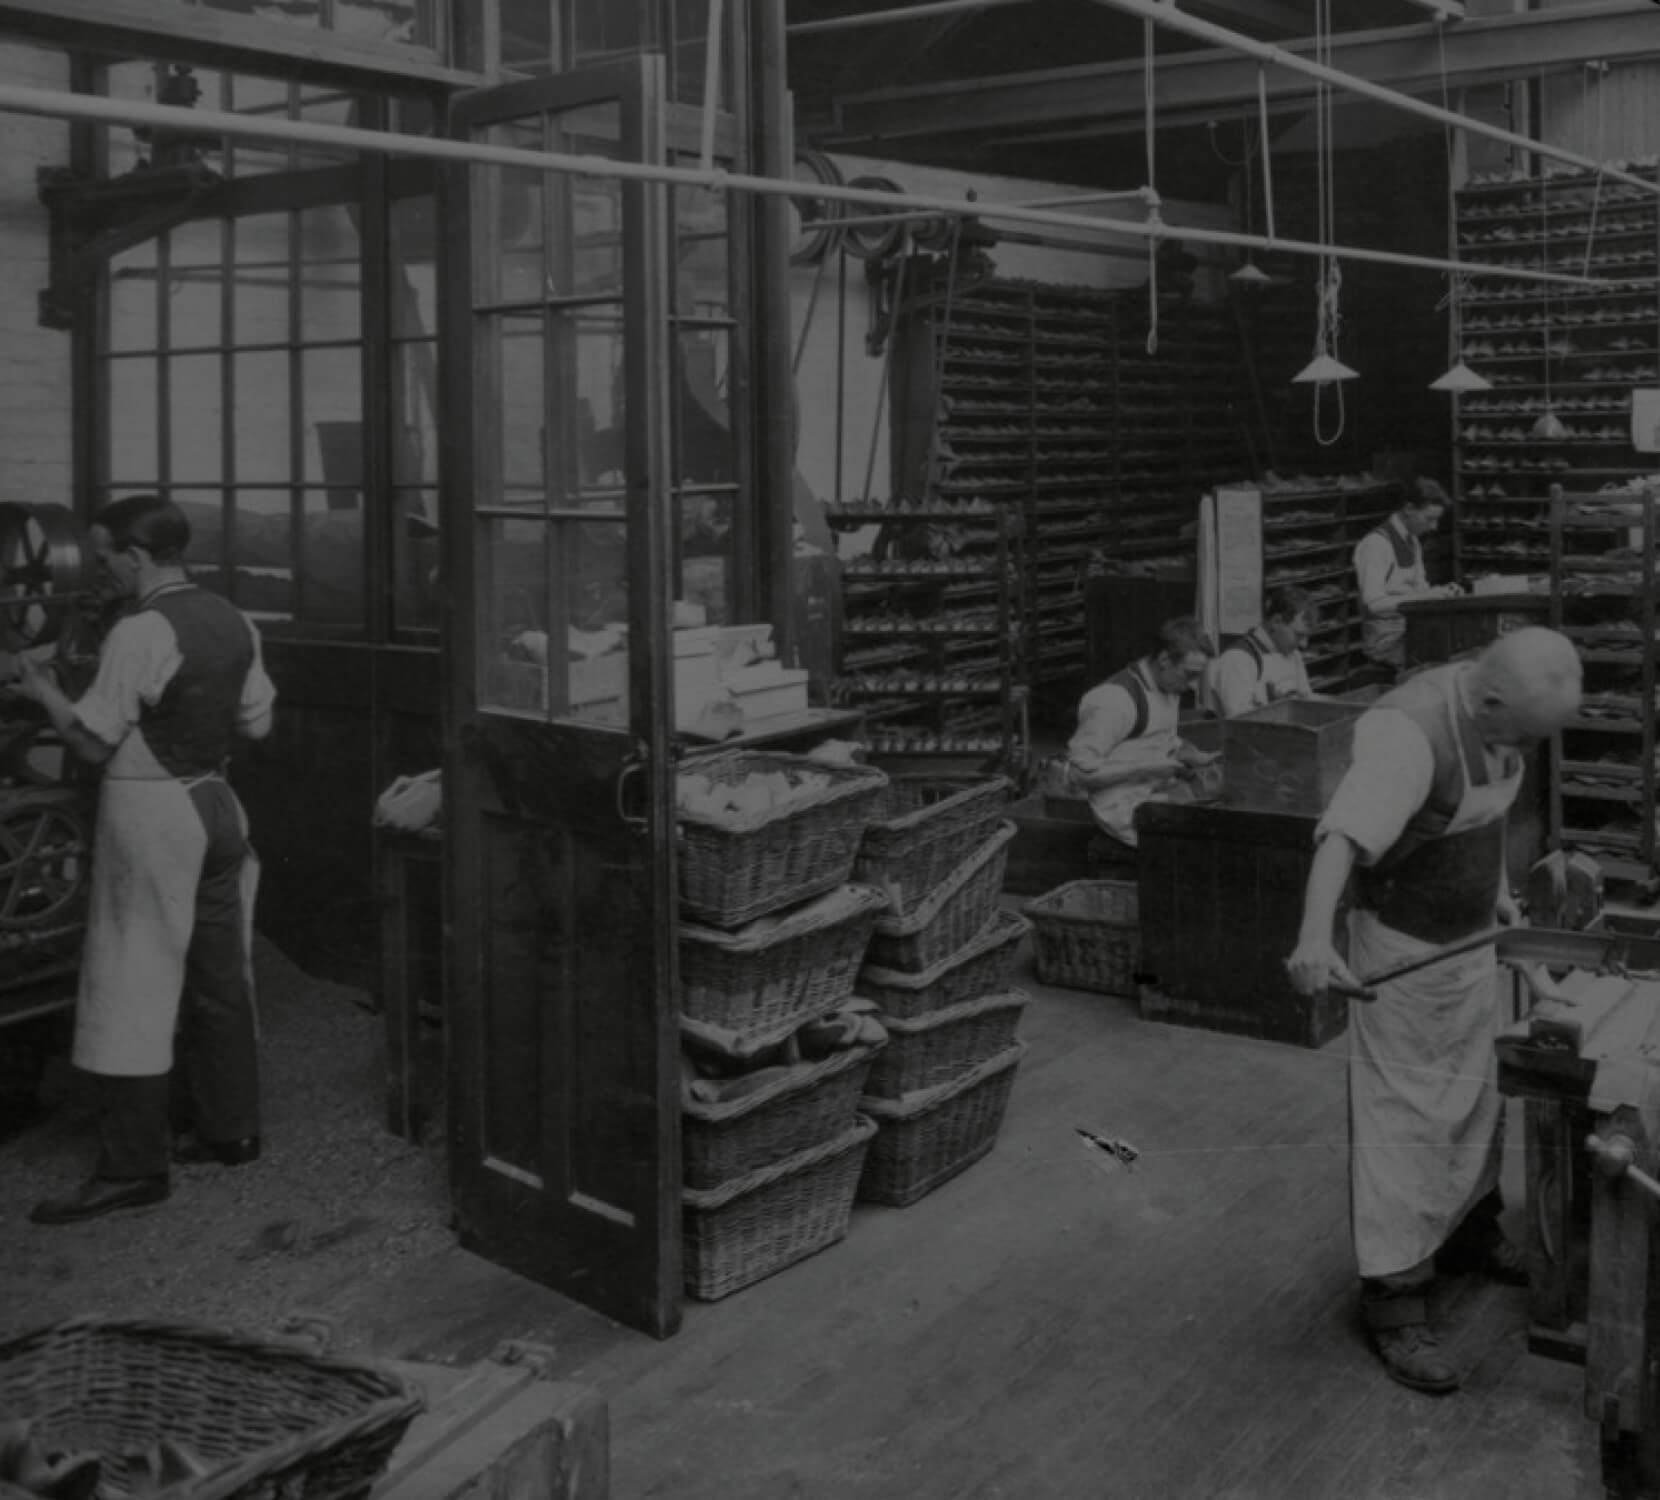 Barker Shoes - Old Photograph of the Blogg Factory.